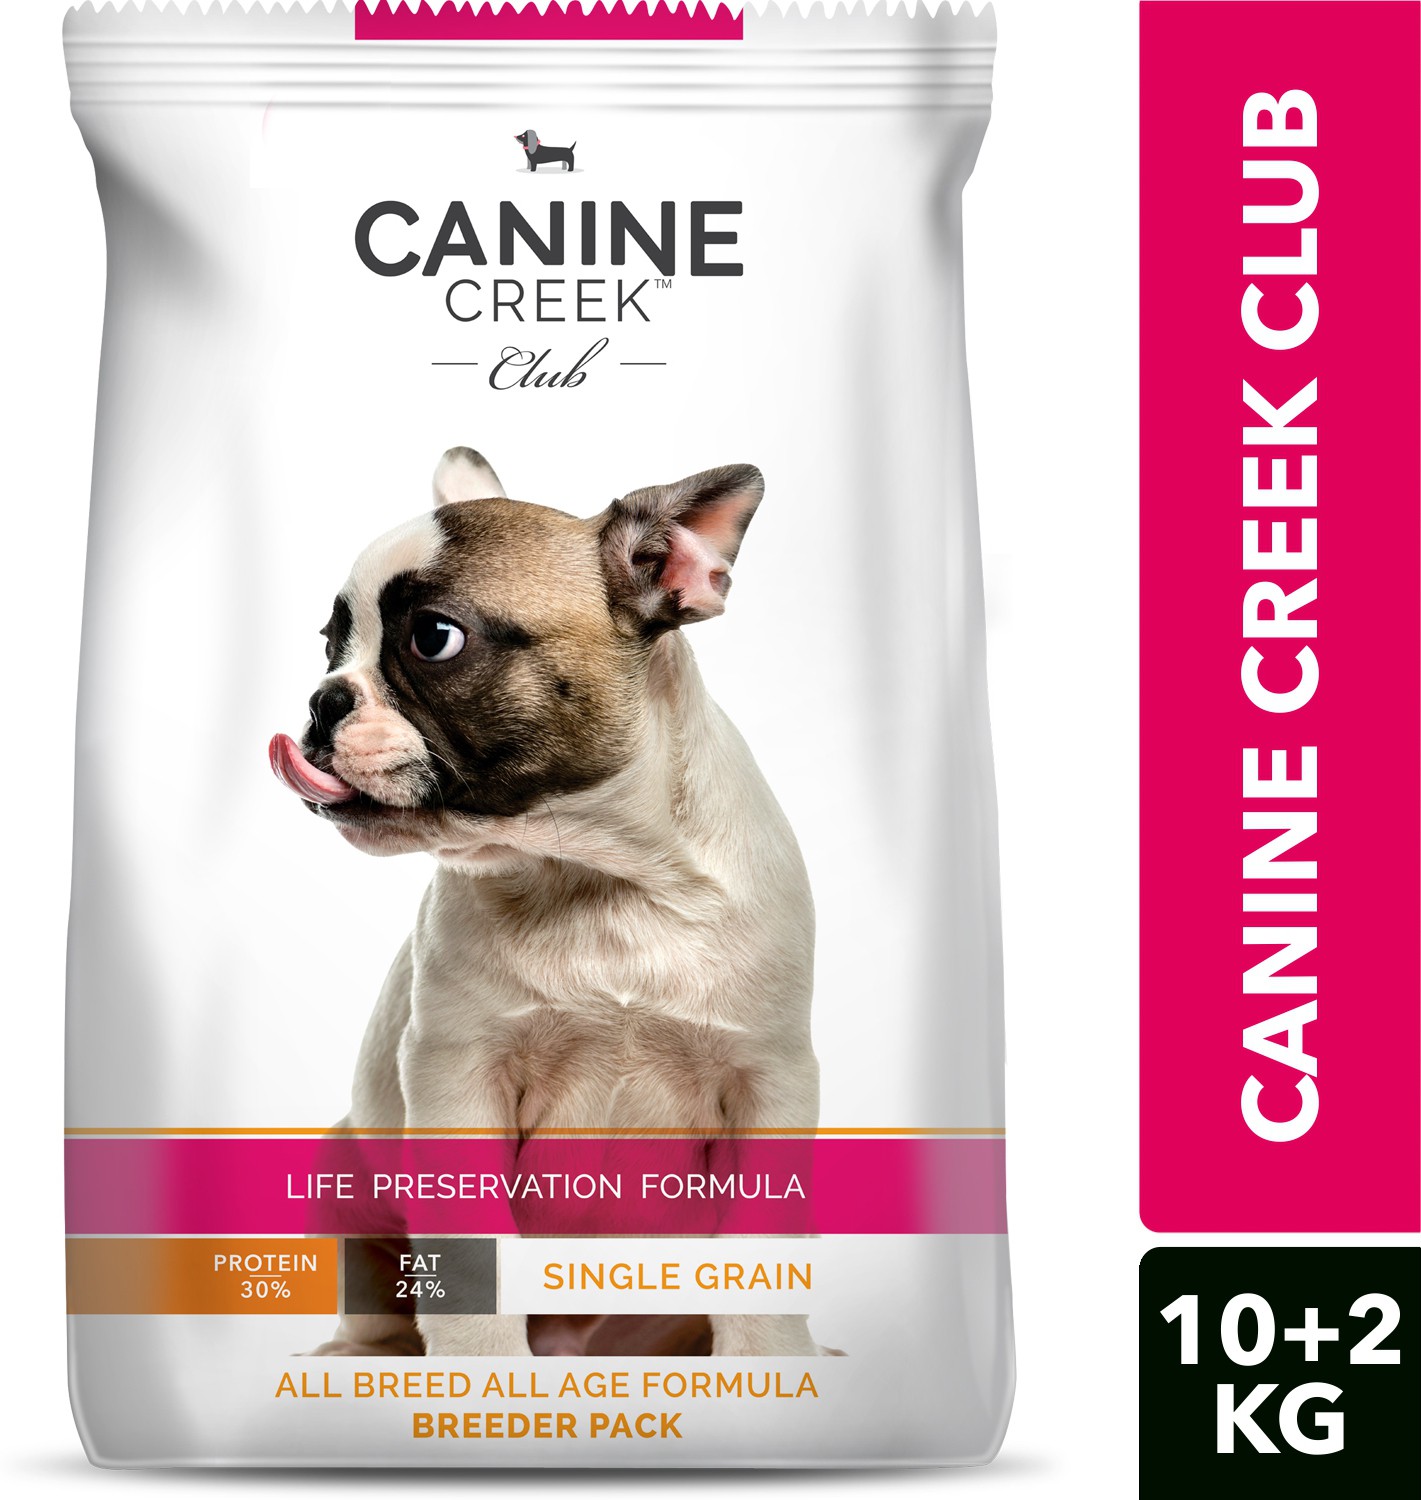 Canine Creek Club Ultra Premium Dry Dog Food for All Lifestages